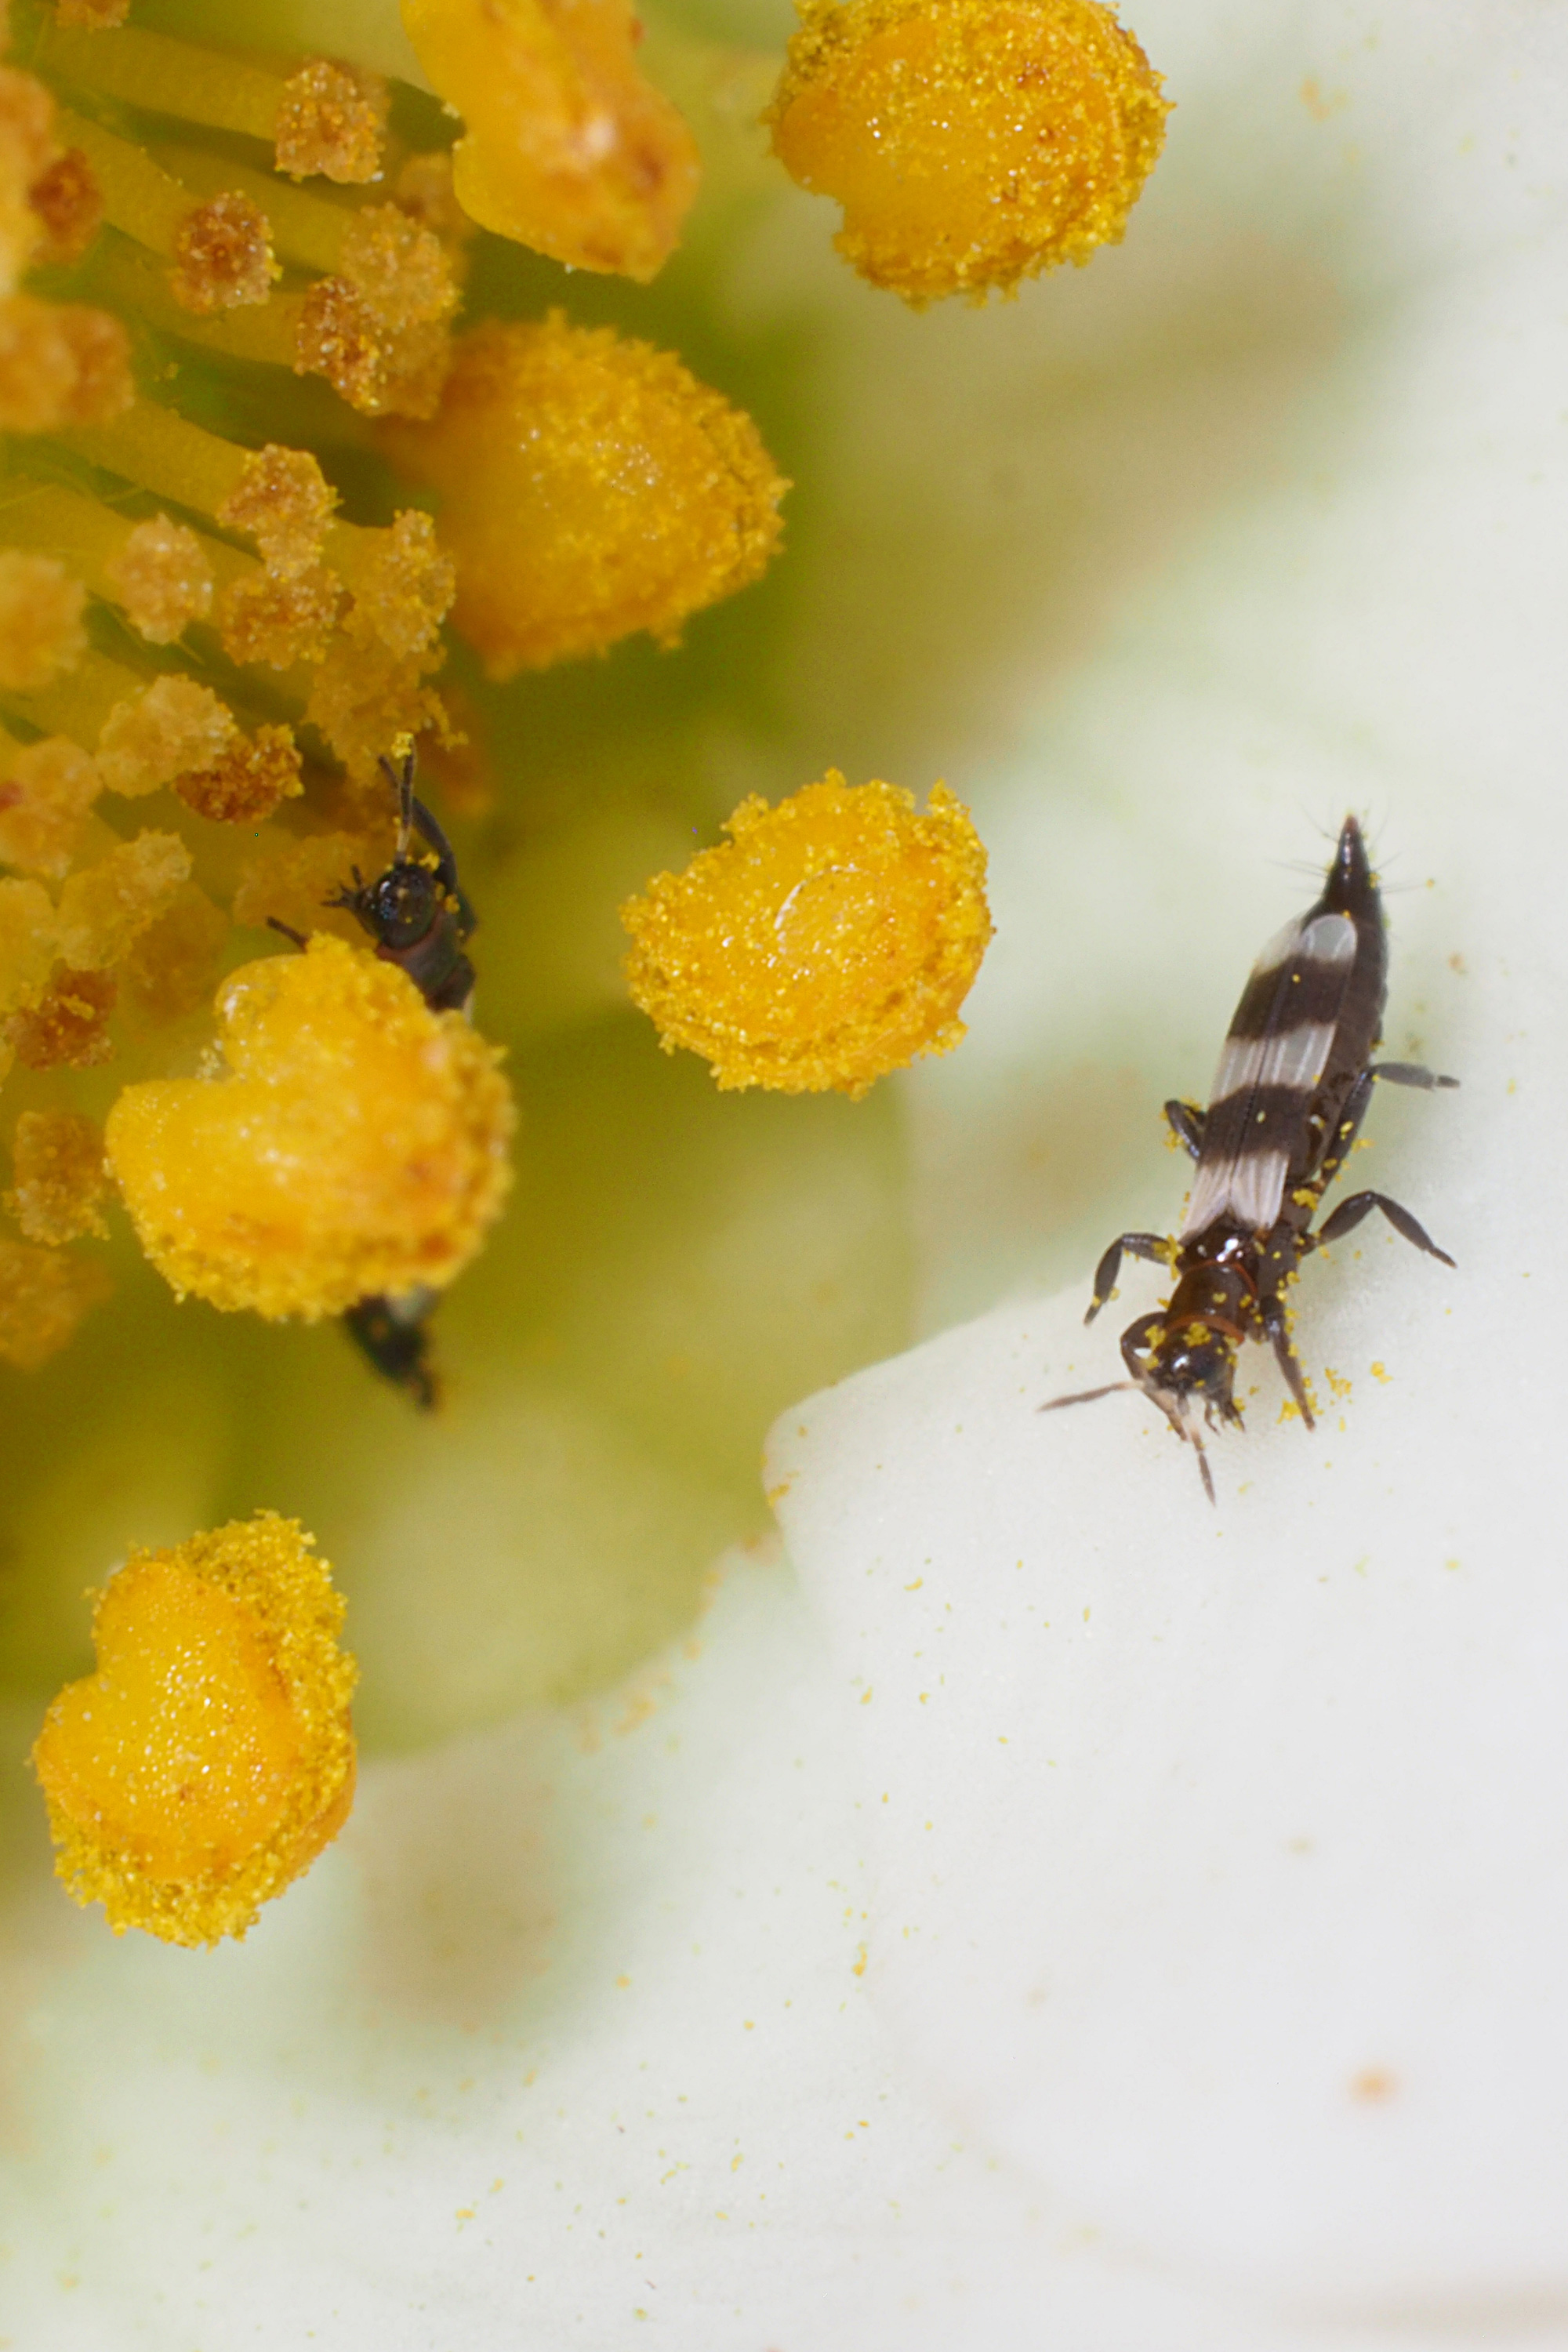 Thrips – one of most feared and widespread sap-sucking pests